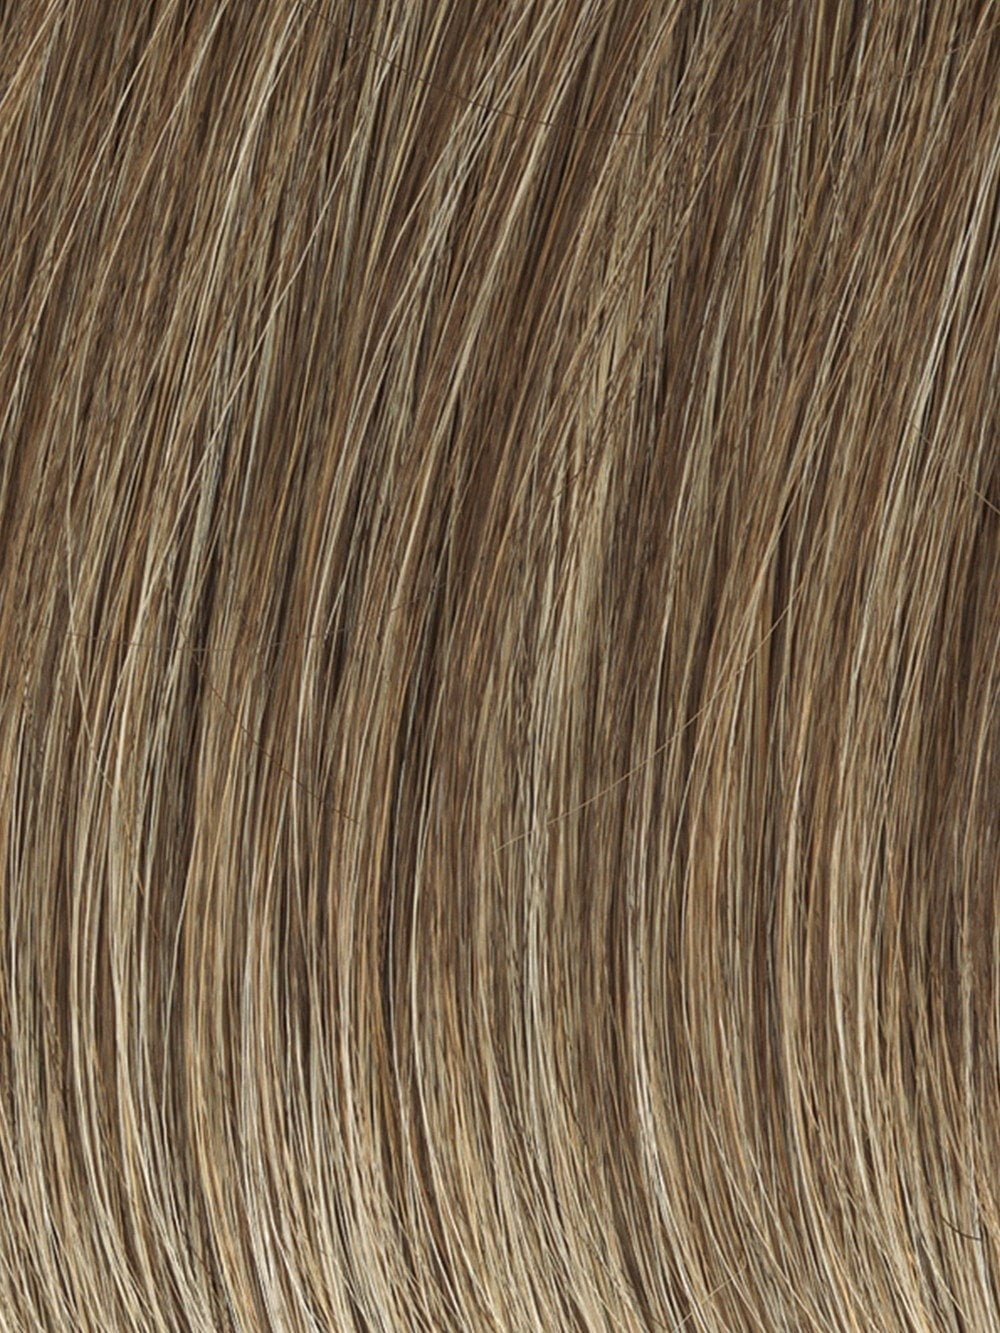 R8/25 | BROWN-BLONDE | Medium to light brown with blonde highlights 